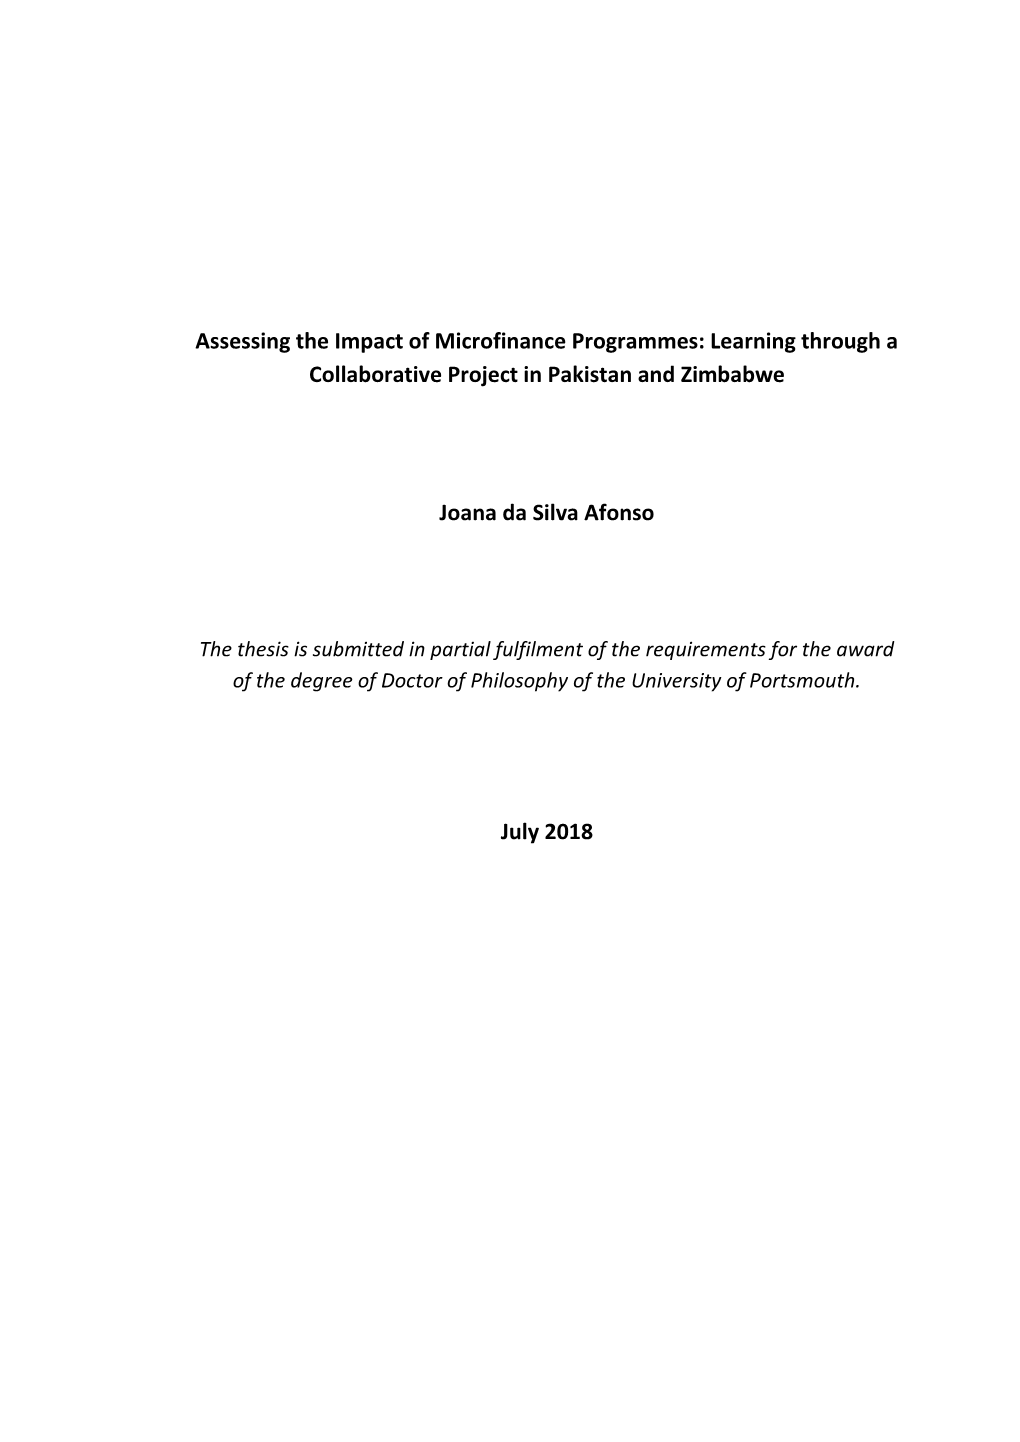 Assessing the Impact of Microfinance Programmes: Learning Through a Collaborative Project in Pakistan and Zimbabwe